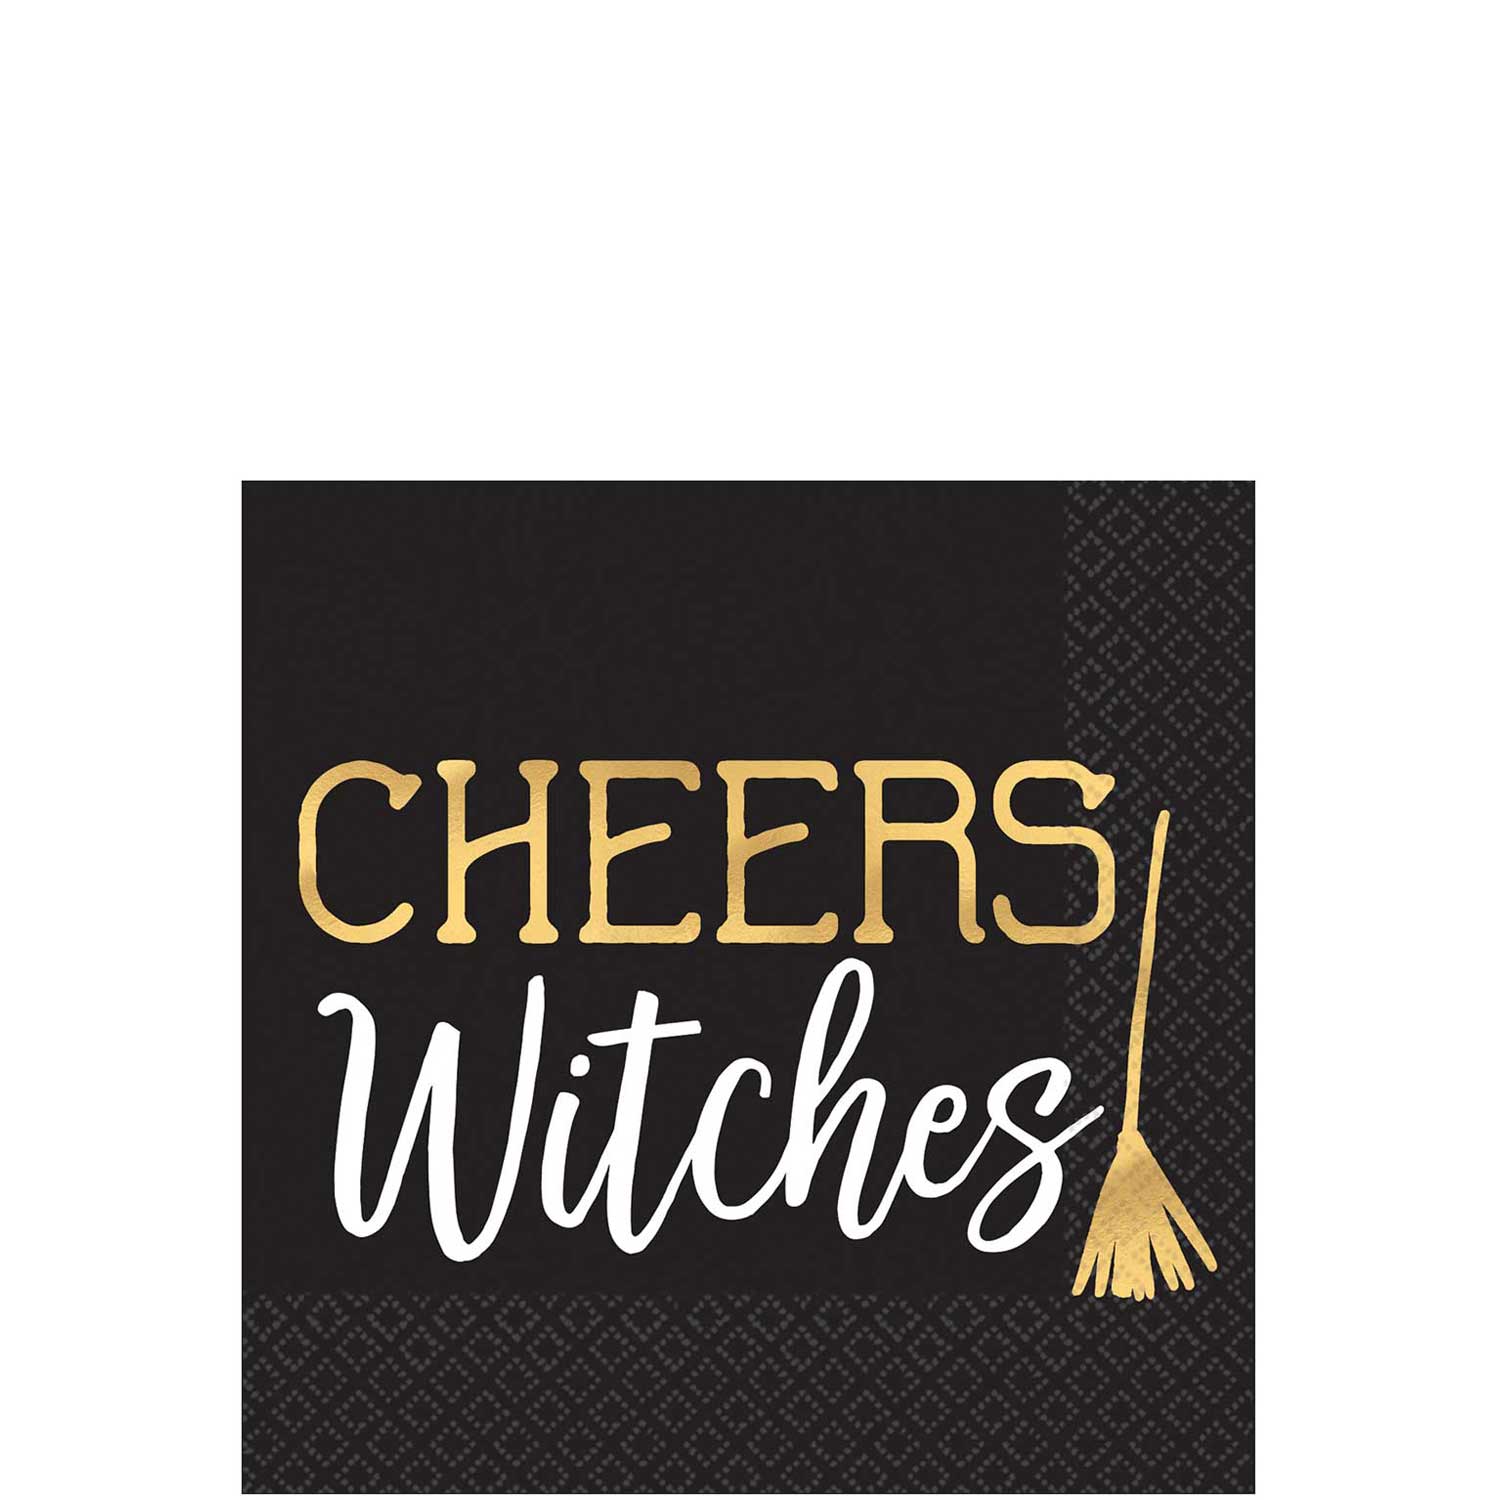 Cheers Witches Hot Stamped Beverage Tissues 16pcs Printed Tableware - Party Centre